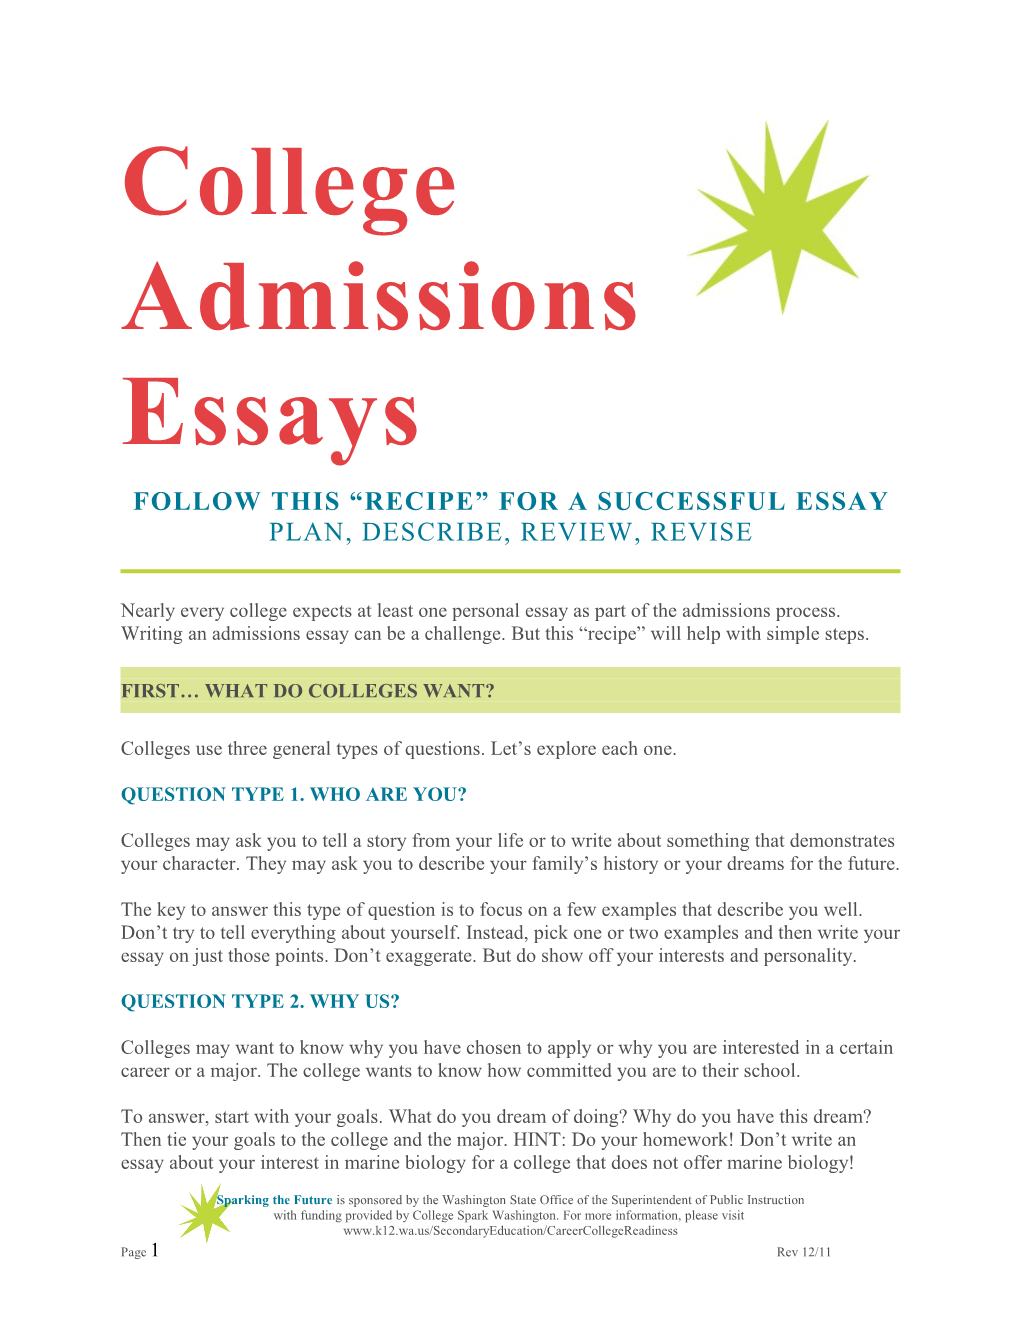 Sparking The Future Grades 11-12 Lesson 7 Admissions Essay